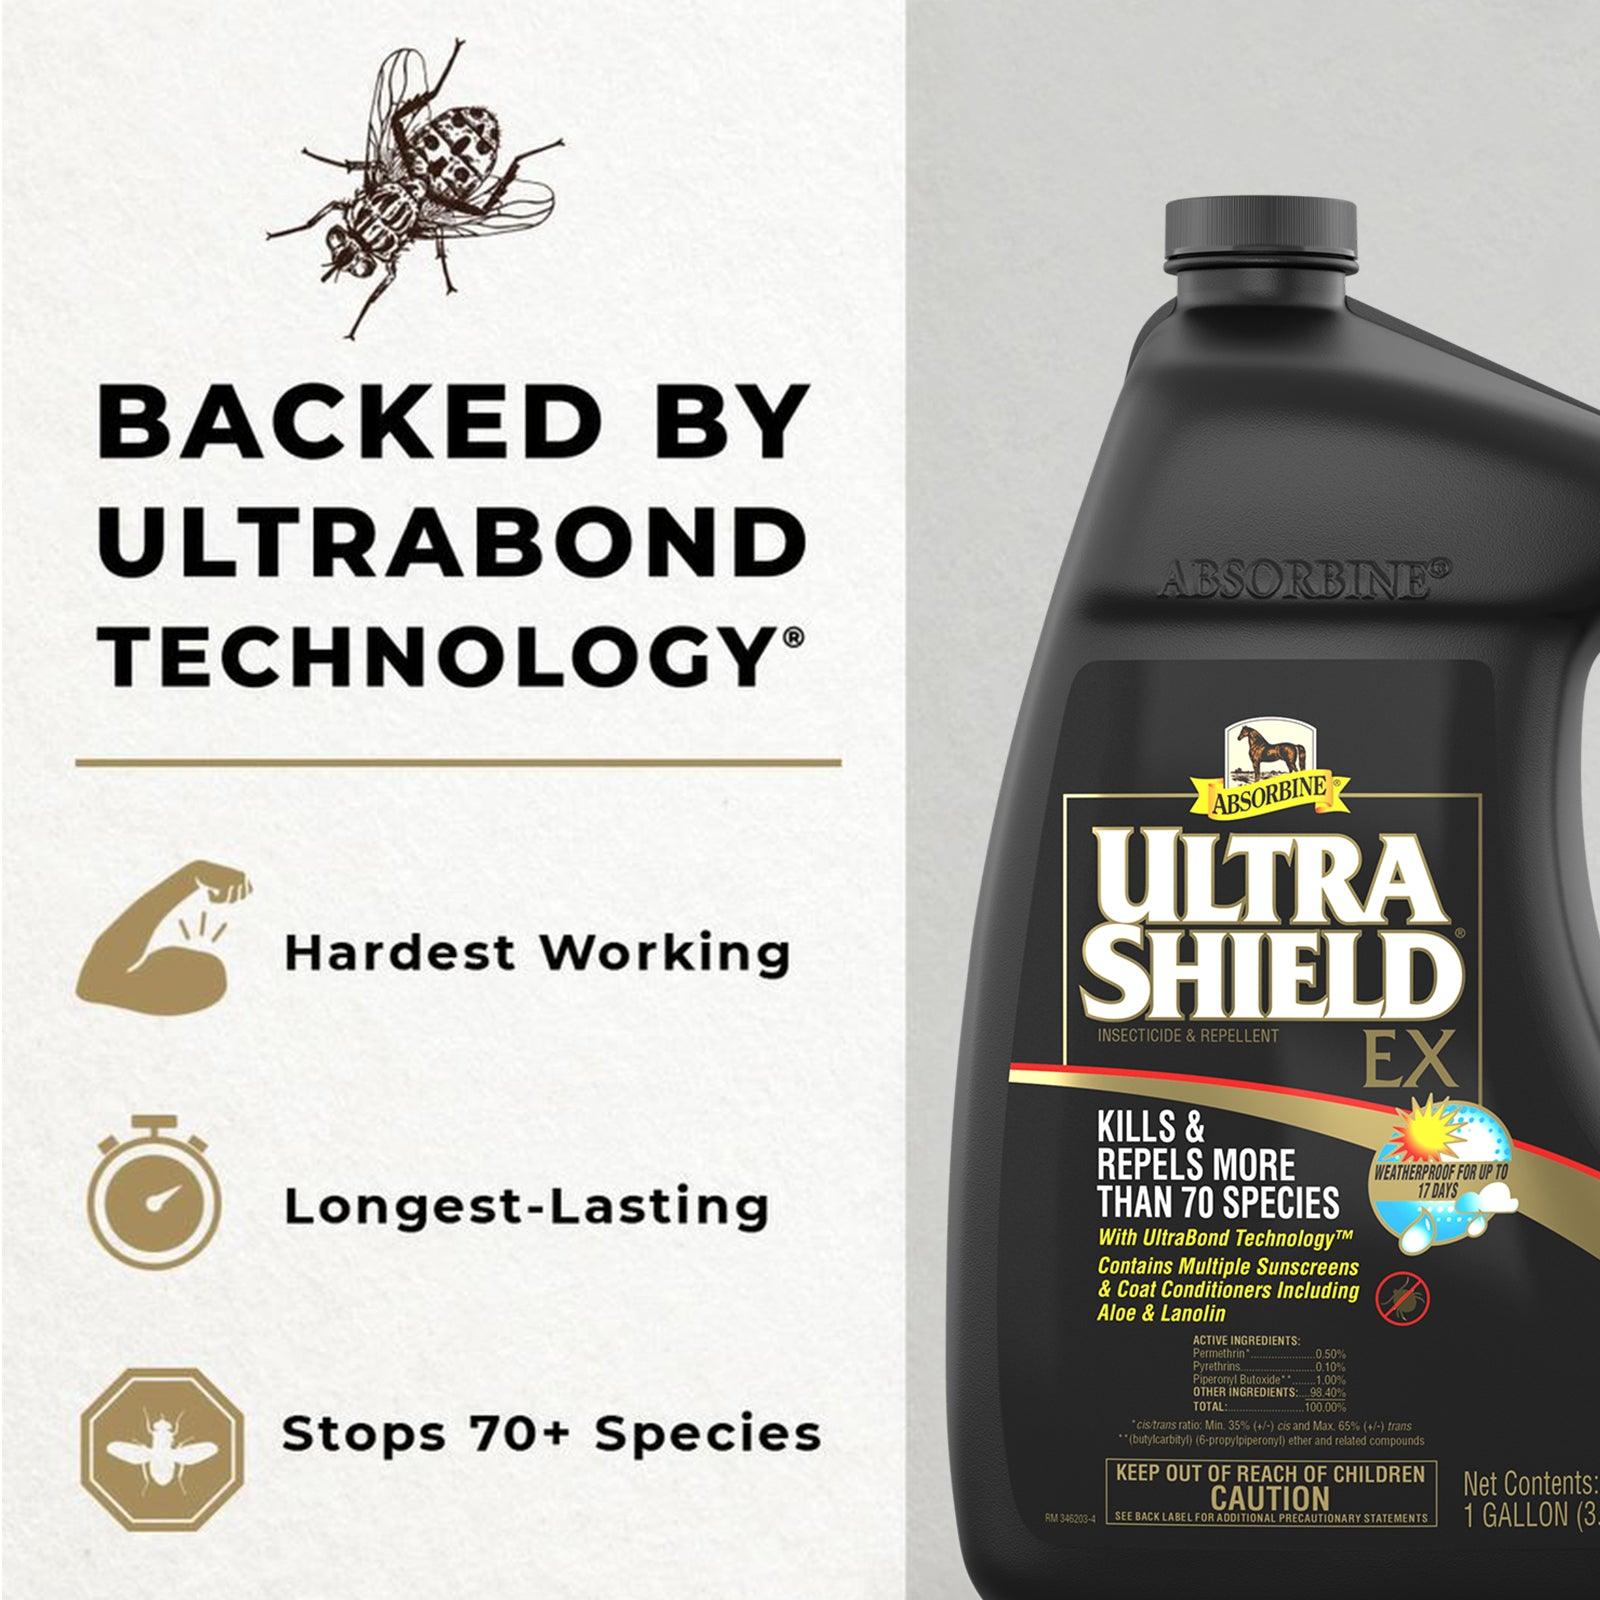 UltraShield Gallon size, backed by ultrabond technology.  The hardest working, longest-lasting, stops 70 plus species Insecticide & repellent.